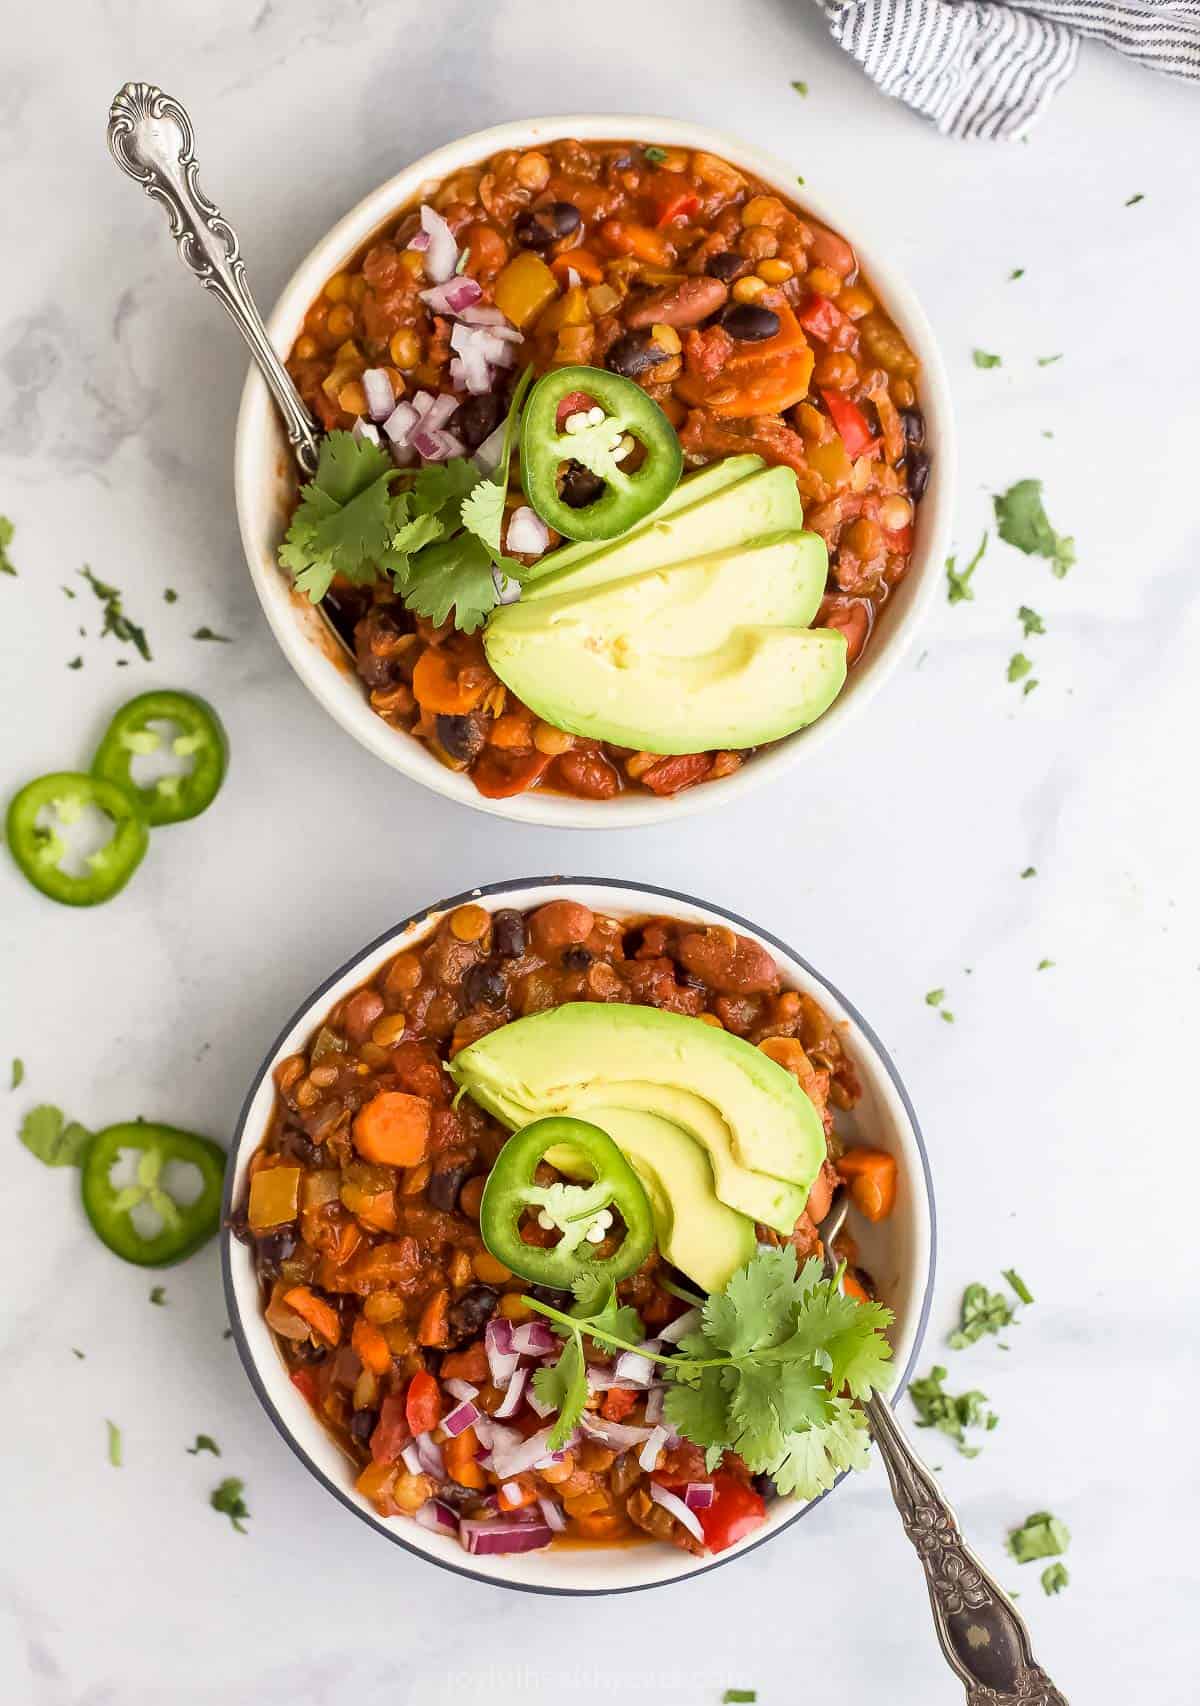 Two bowls filled with vegetarian lentil chili and toppings.